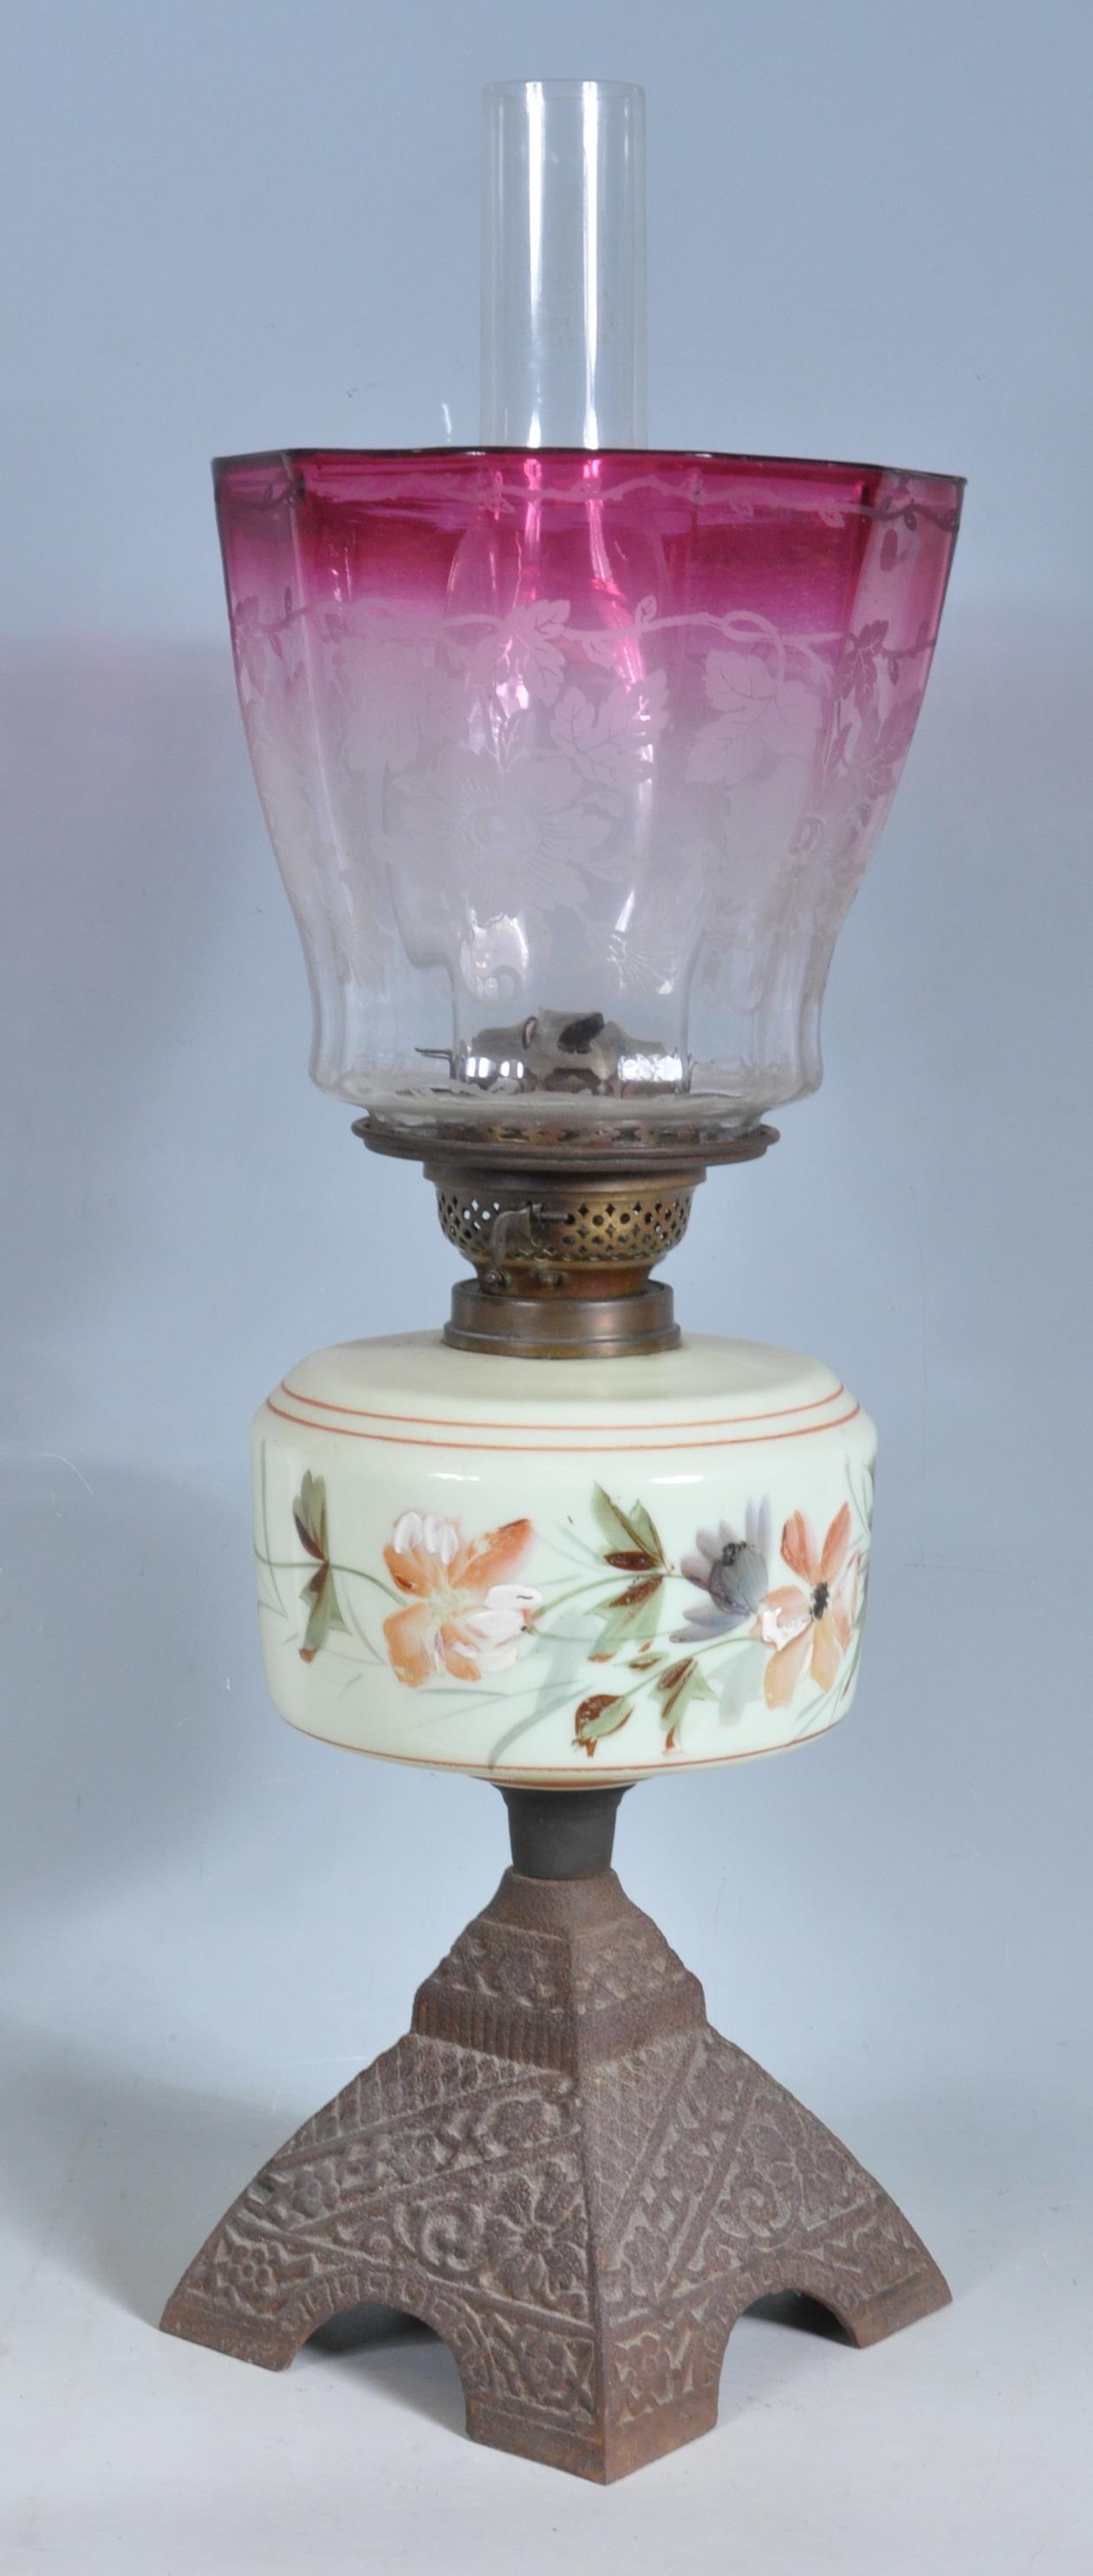 LATE 19TH CENTURY VICTORIAN CRANBERRY GLASS OIL LAMP